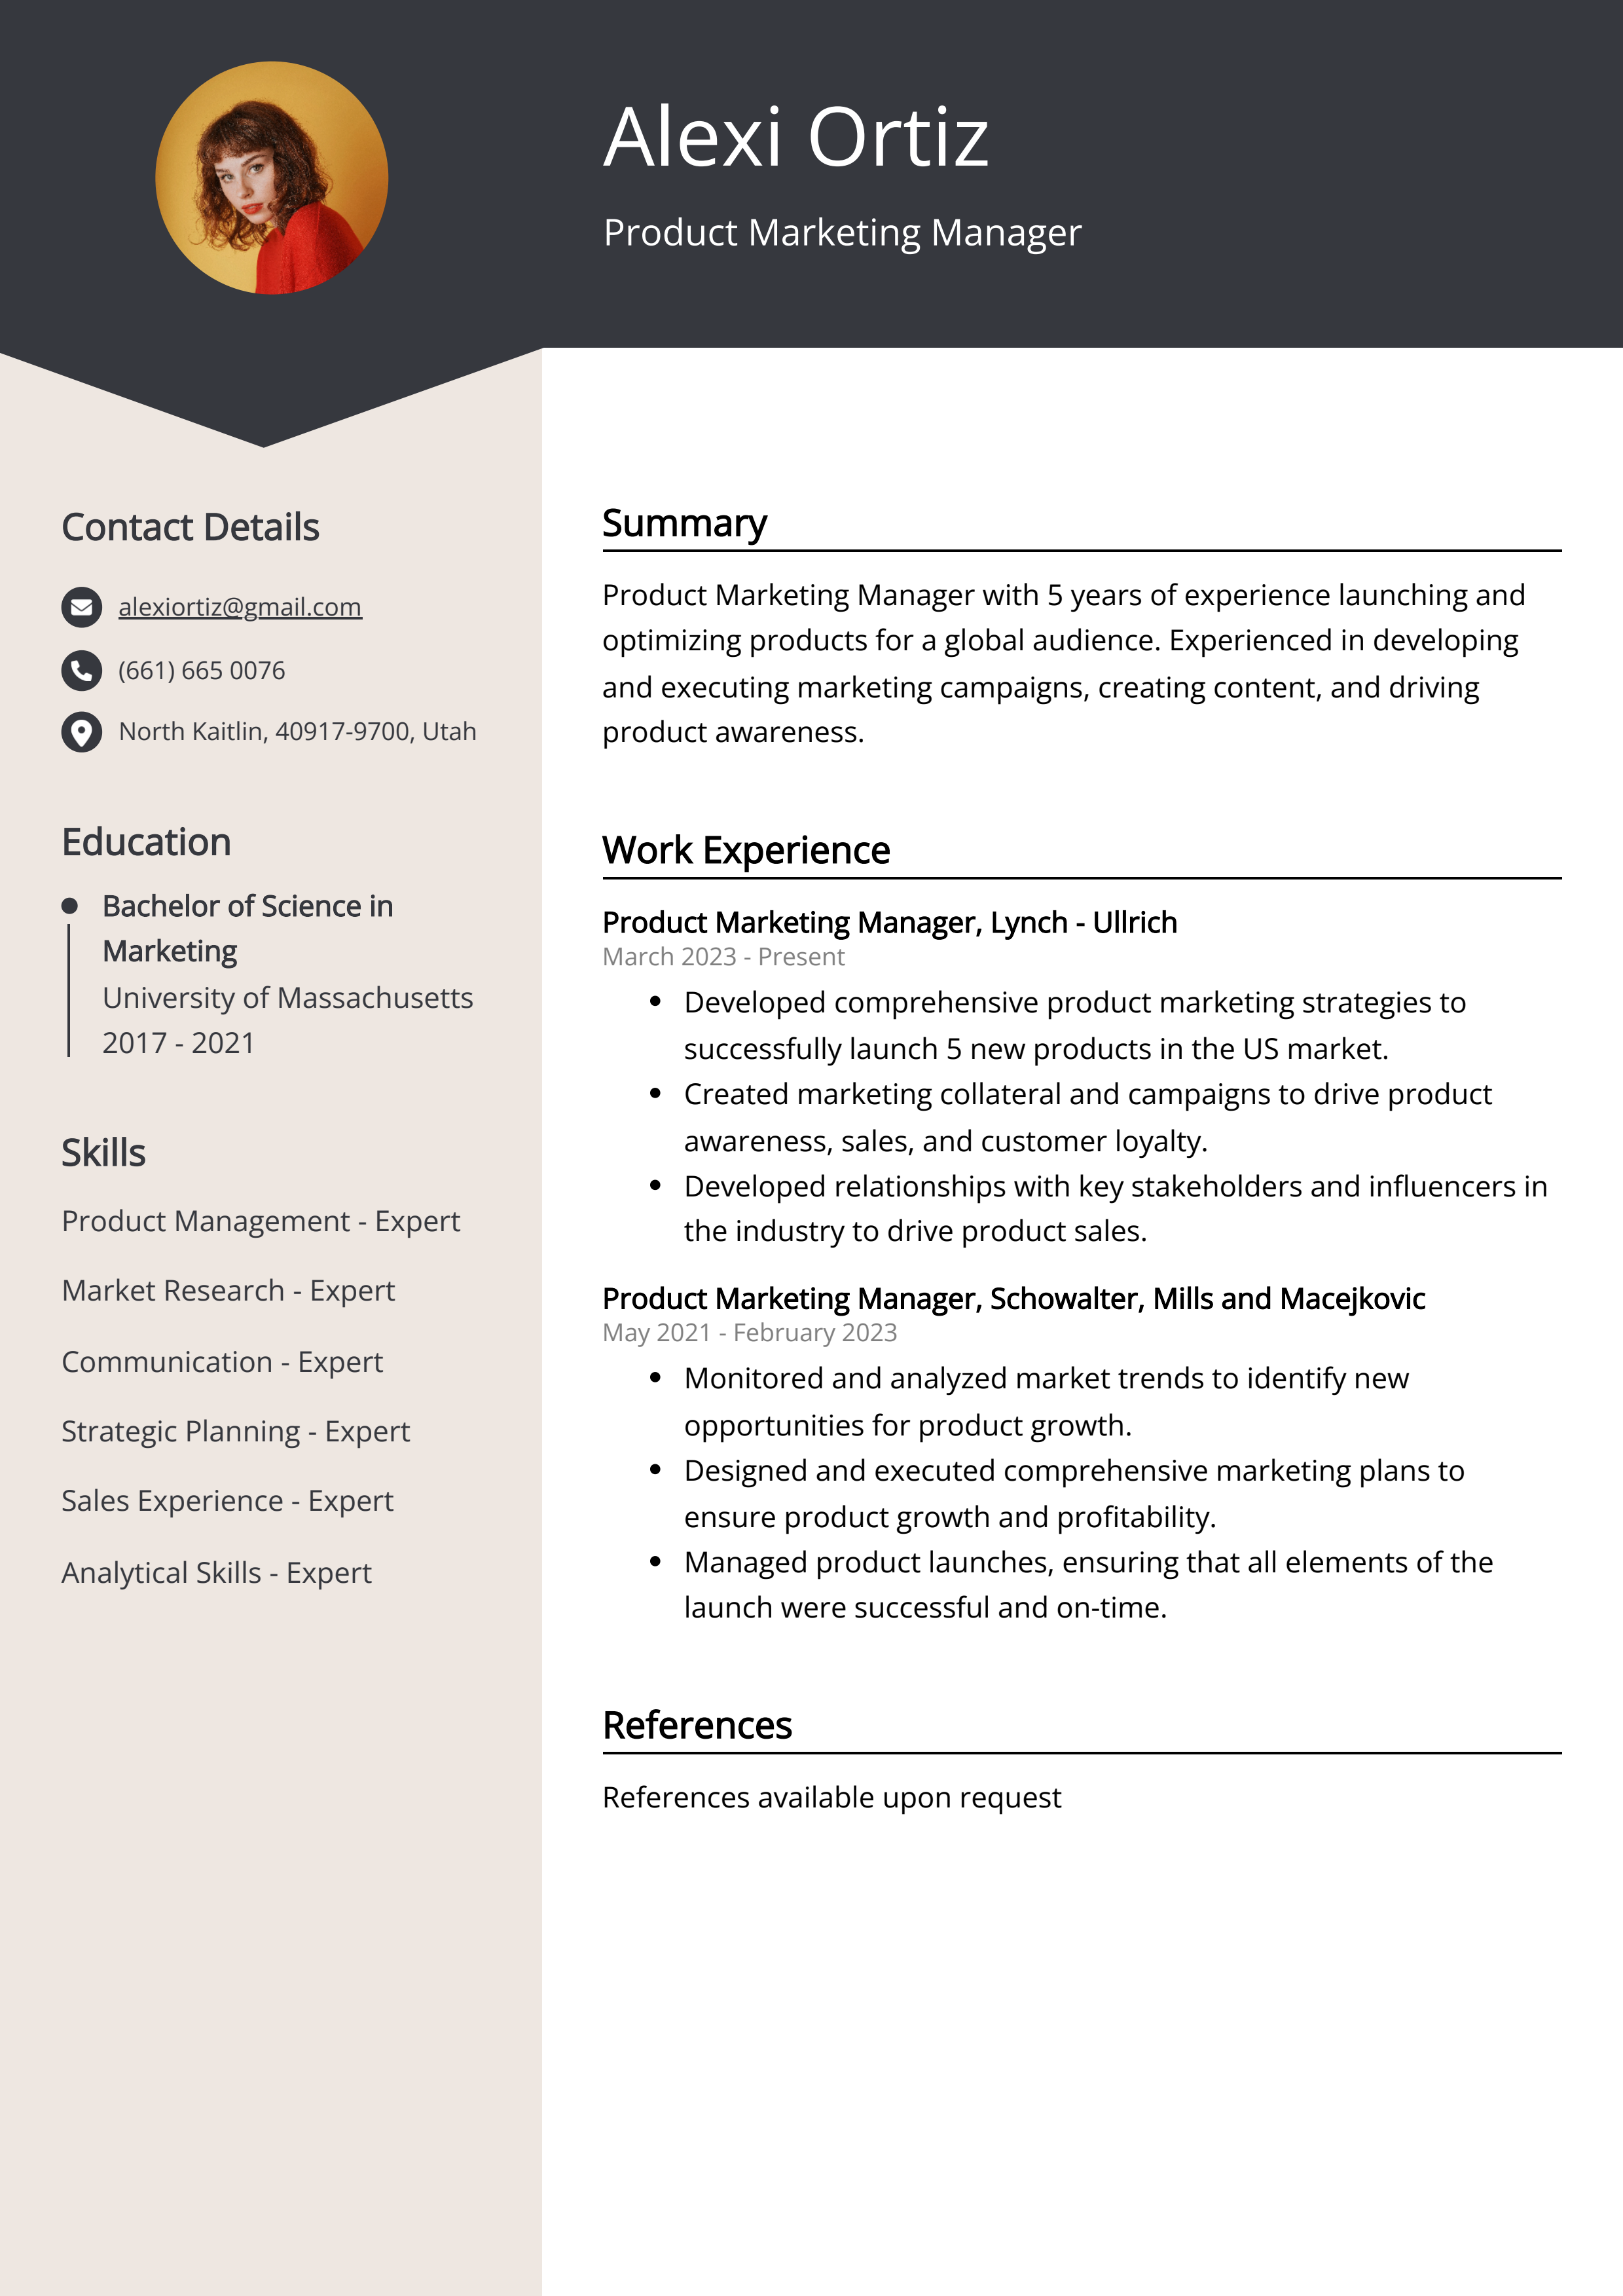 Product Marketing Manager CV Example